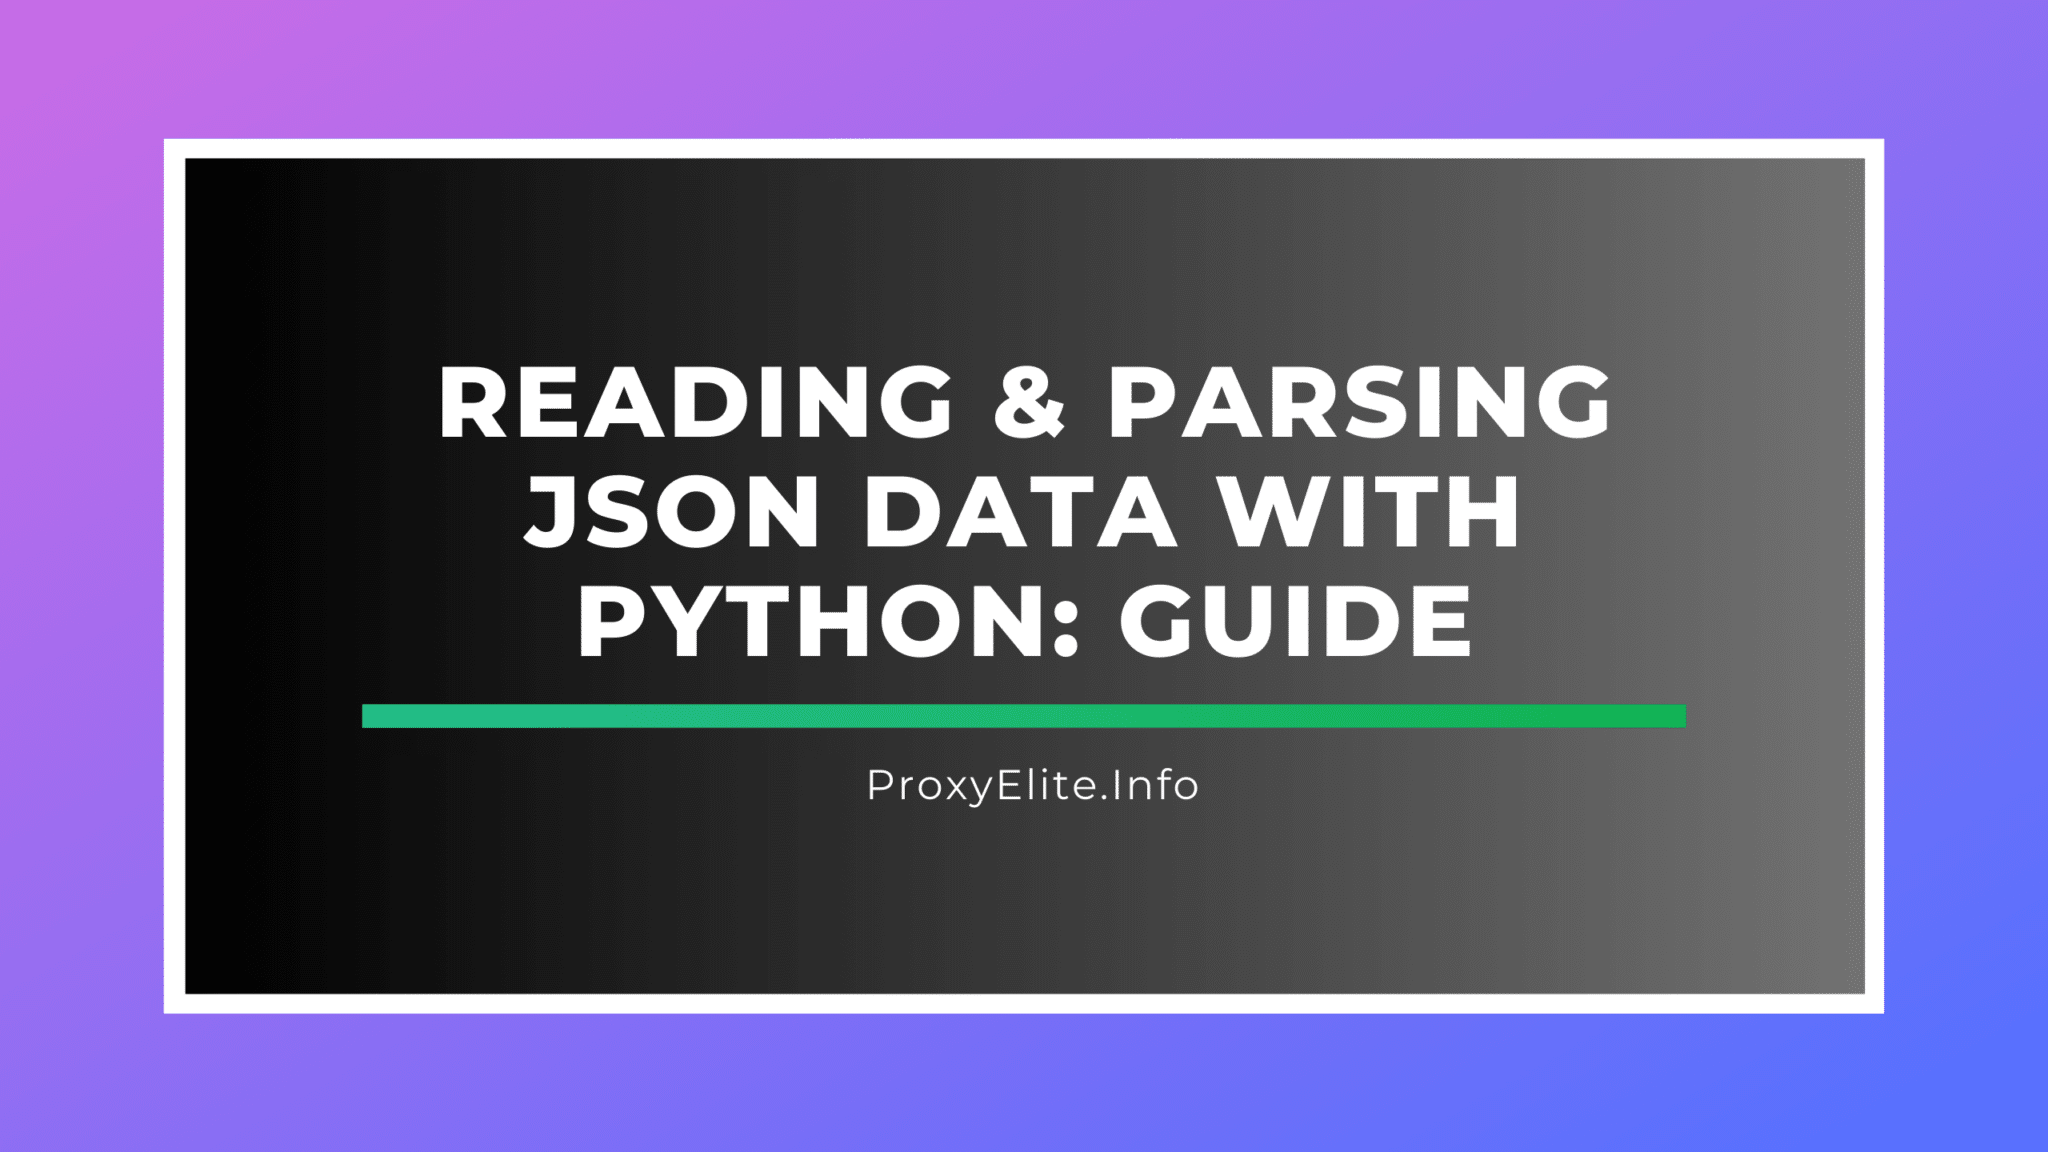 Reading & Parsing JSON Data With Python: Guide